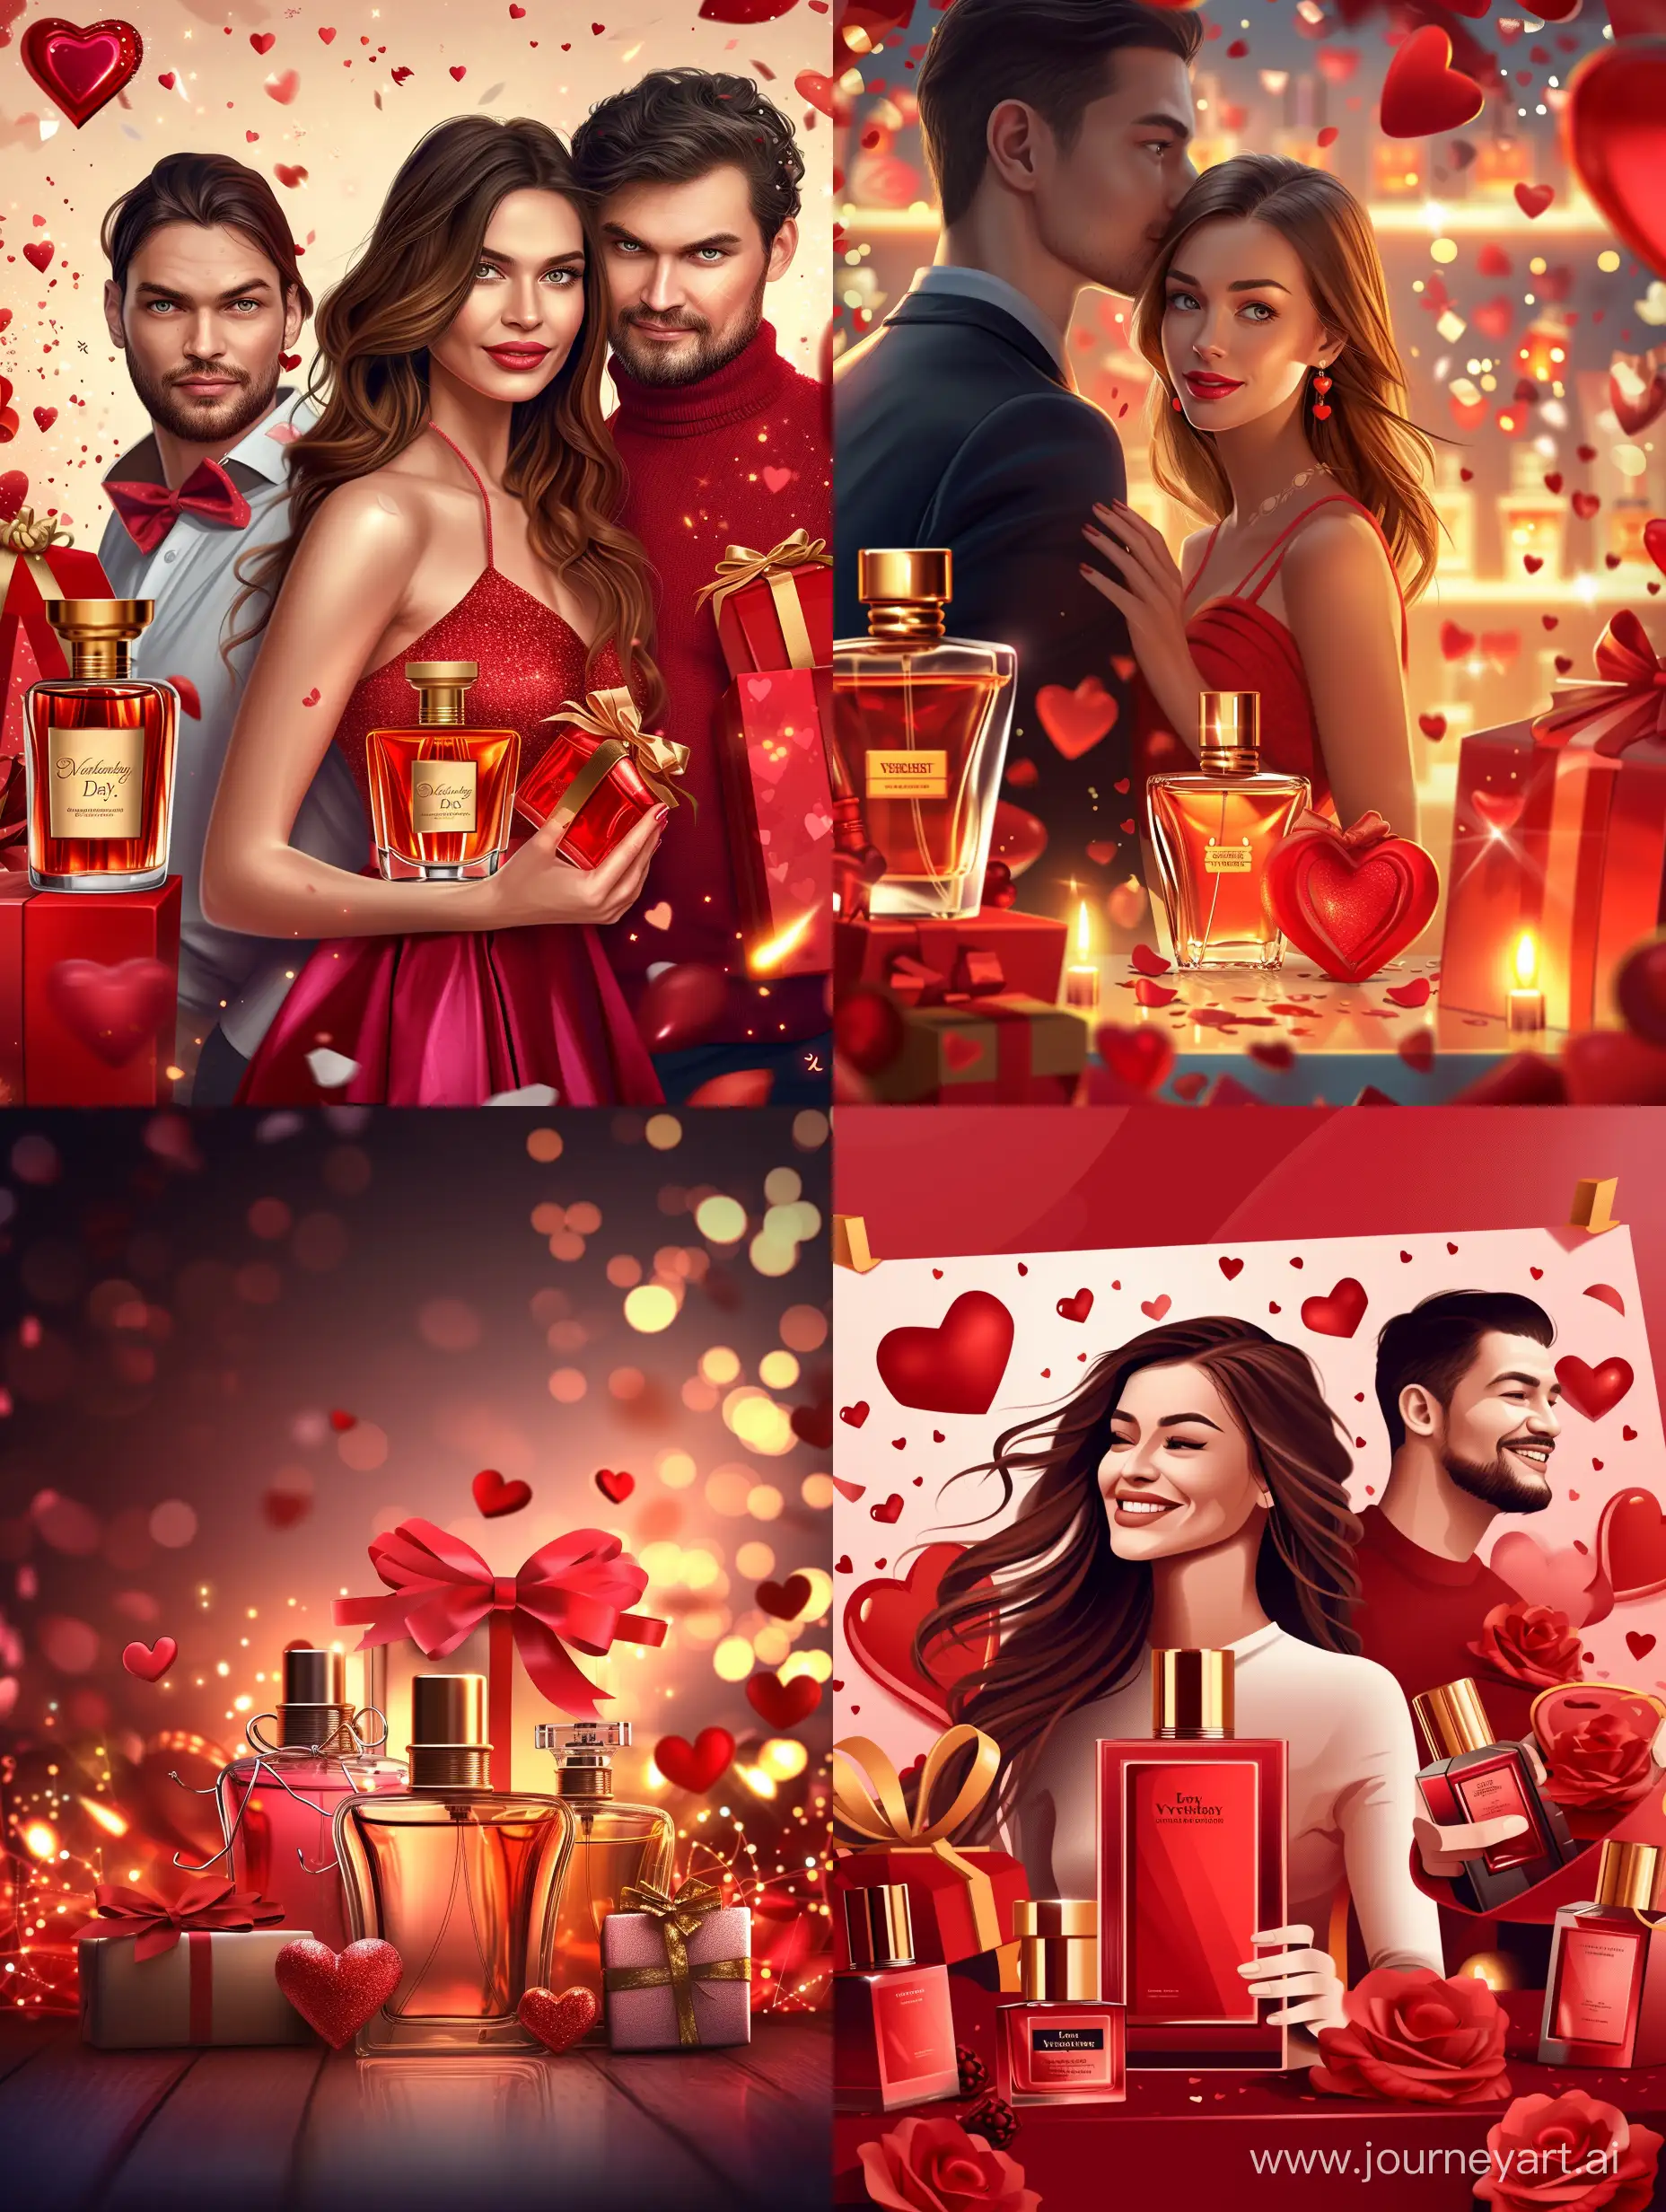 Valentines-Day-Perfume-Bottles-and-Gifts-for-Romantic-Celebration